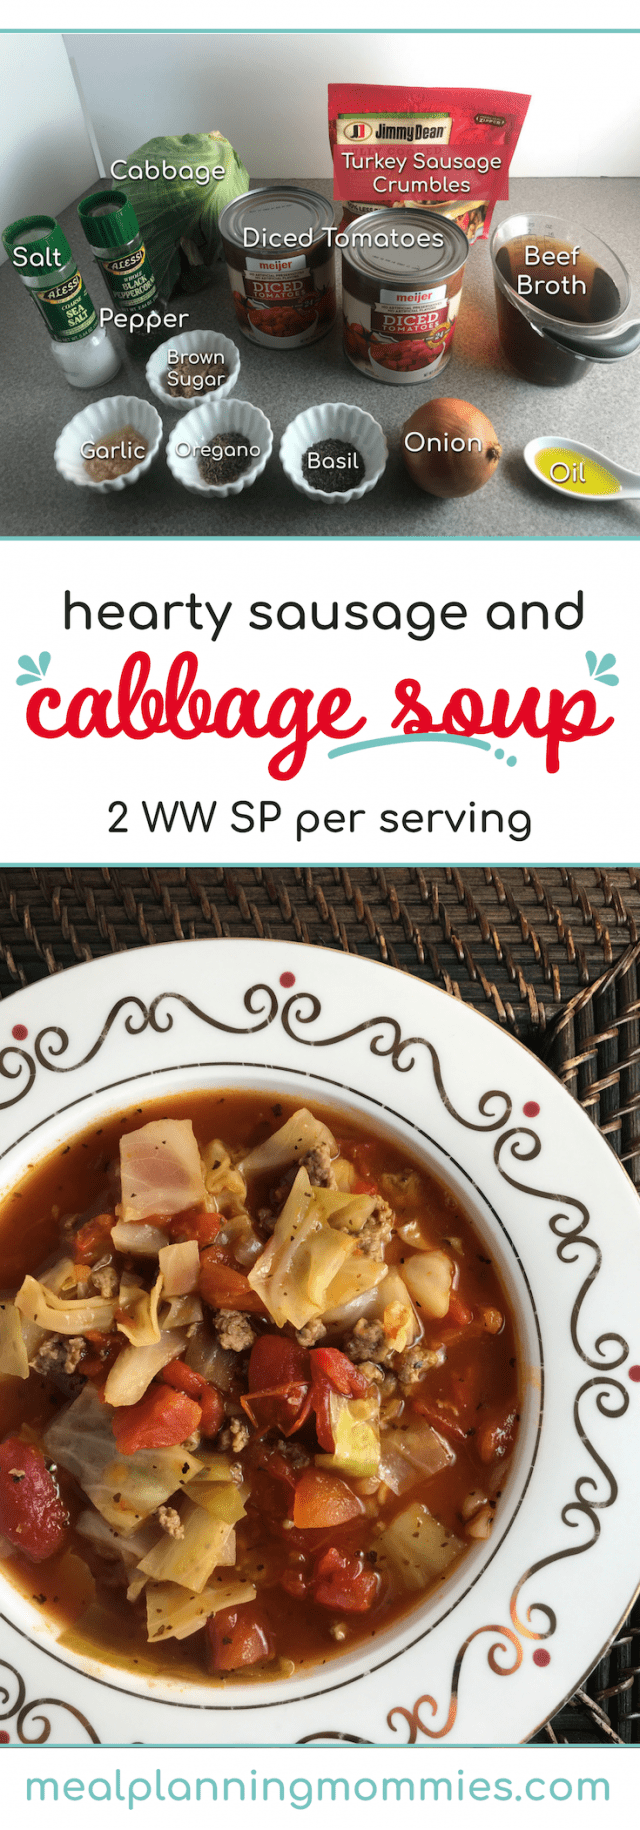 Hearty sausage and cabbage soup on Meal Planning Mommies - Just 2 WW FreeStyle SP per serving!